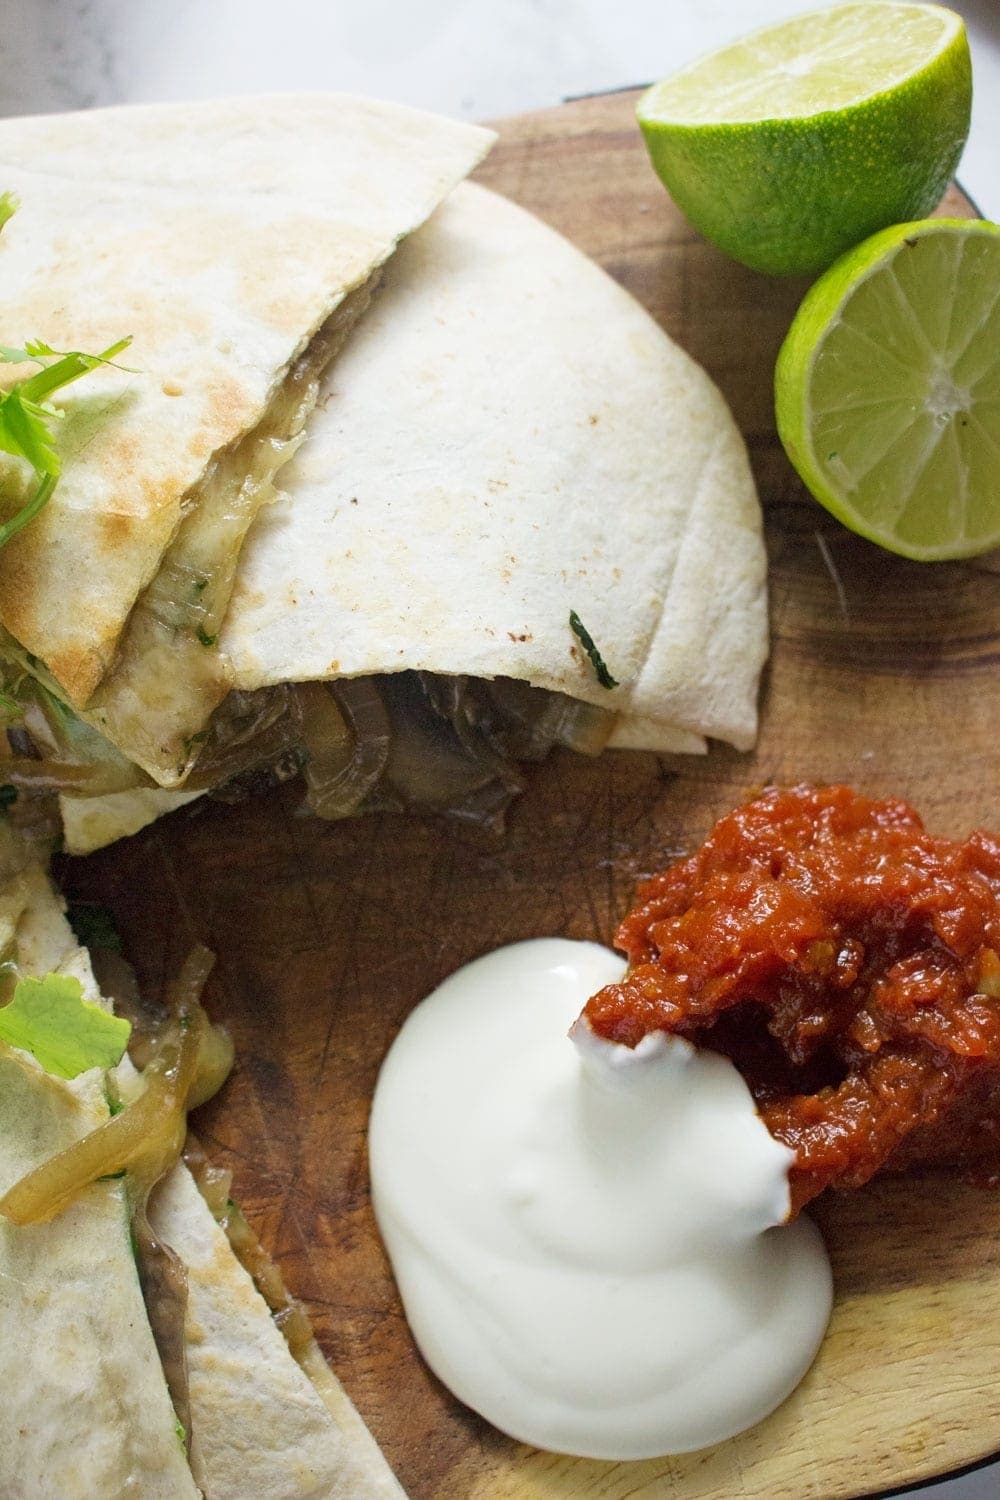 These portobello & caramelised onion quesadillas are the perfect vegetarian dinner when you're craving something full of Mexican flavour!